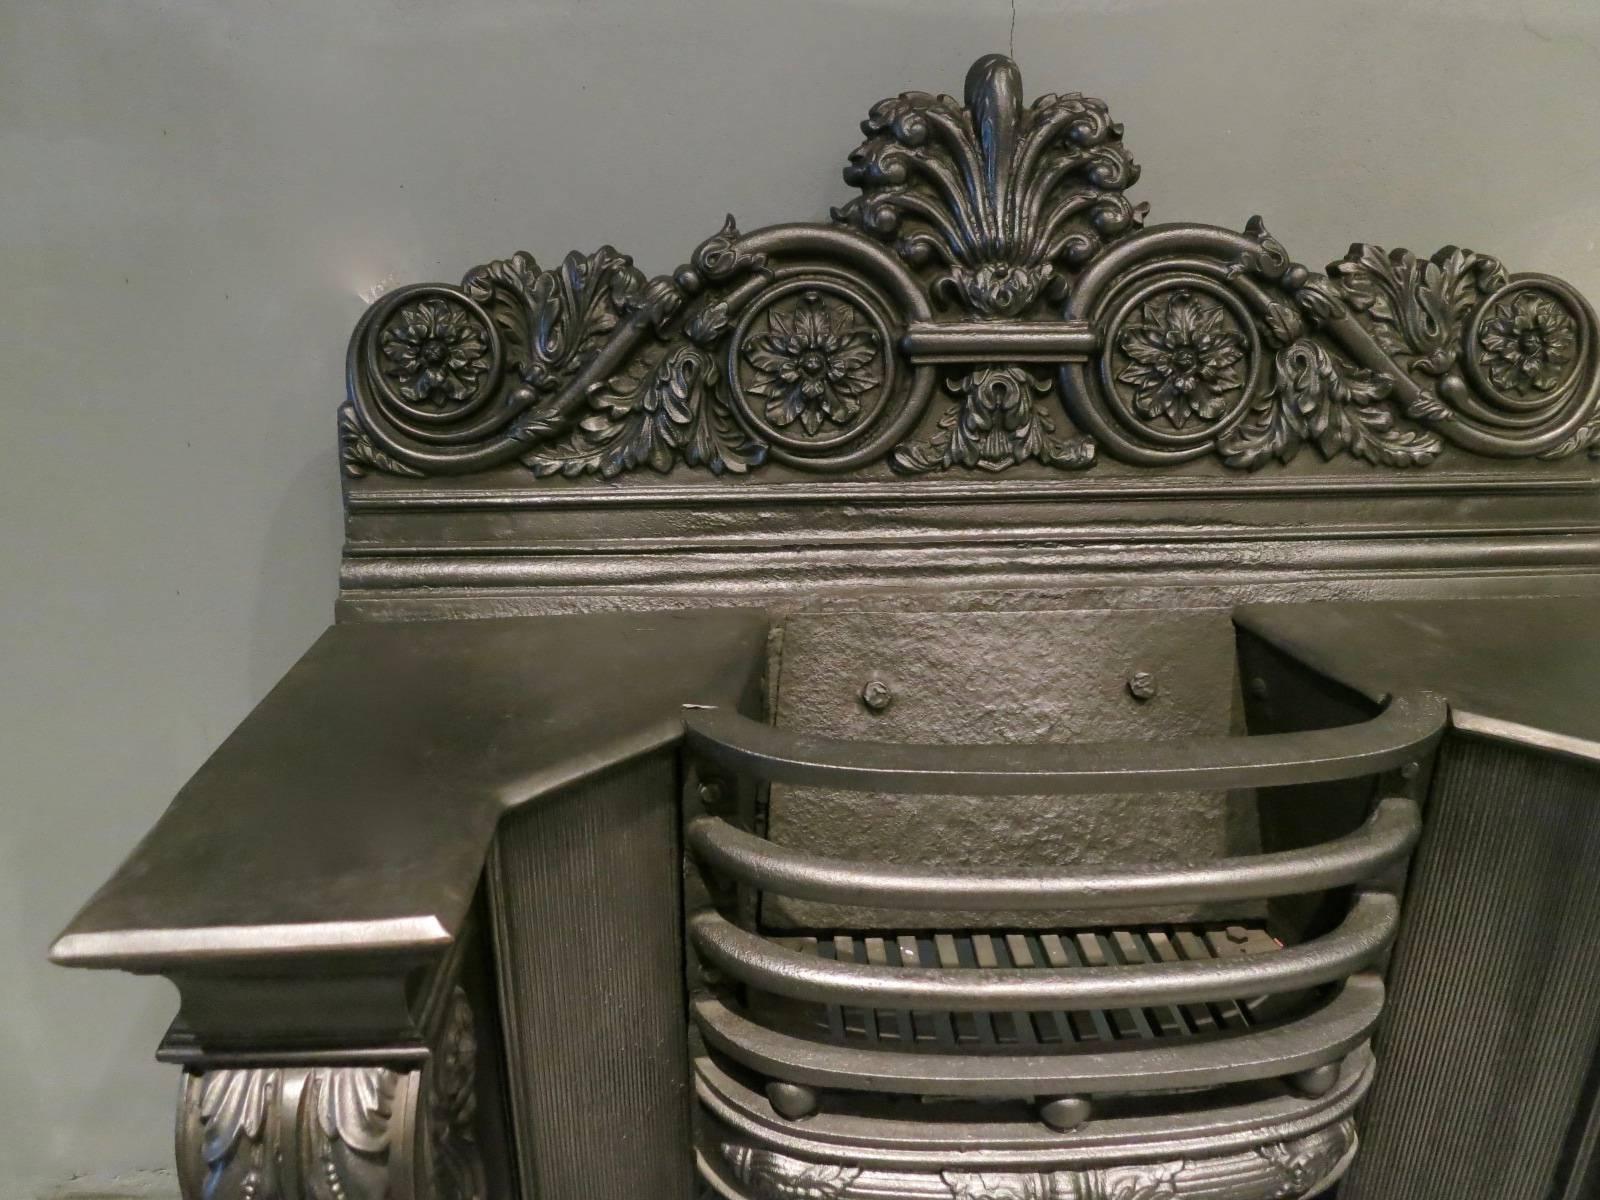 A finely cast hob grate from the early 19th century, in the manner of George Bullock. The scrolled Acanthus leaf console uprights with inverted reeded panels, bowed front bars with ball decoration and foliate and patarae pediment. A quality piece